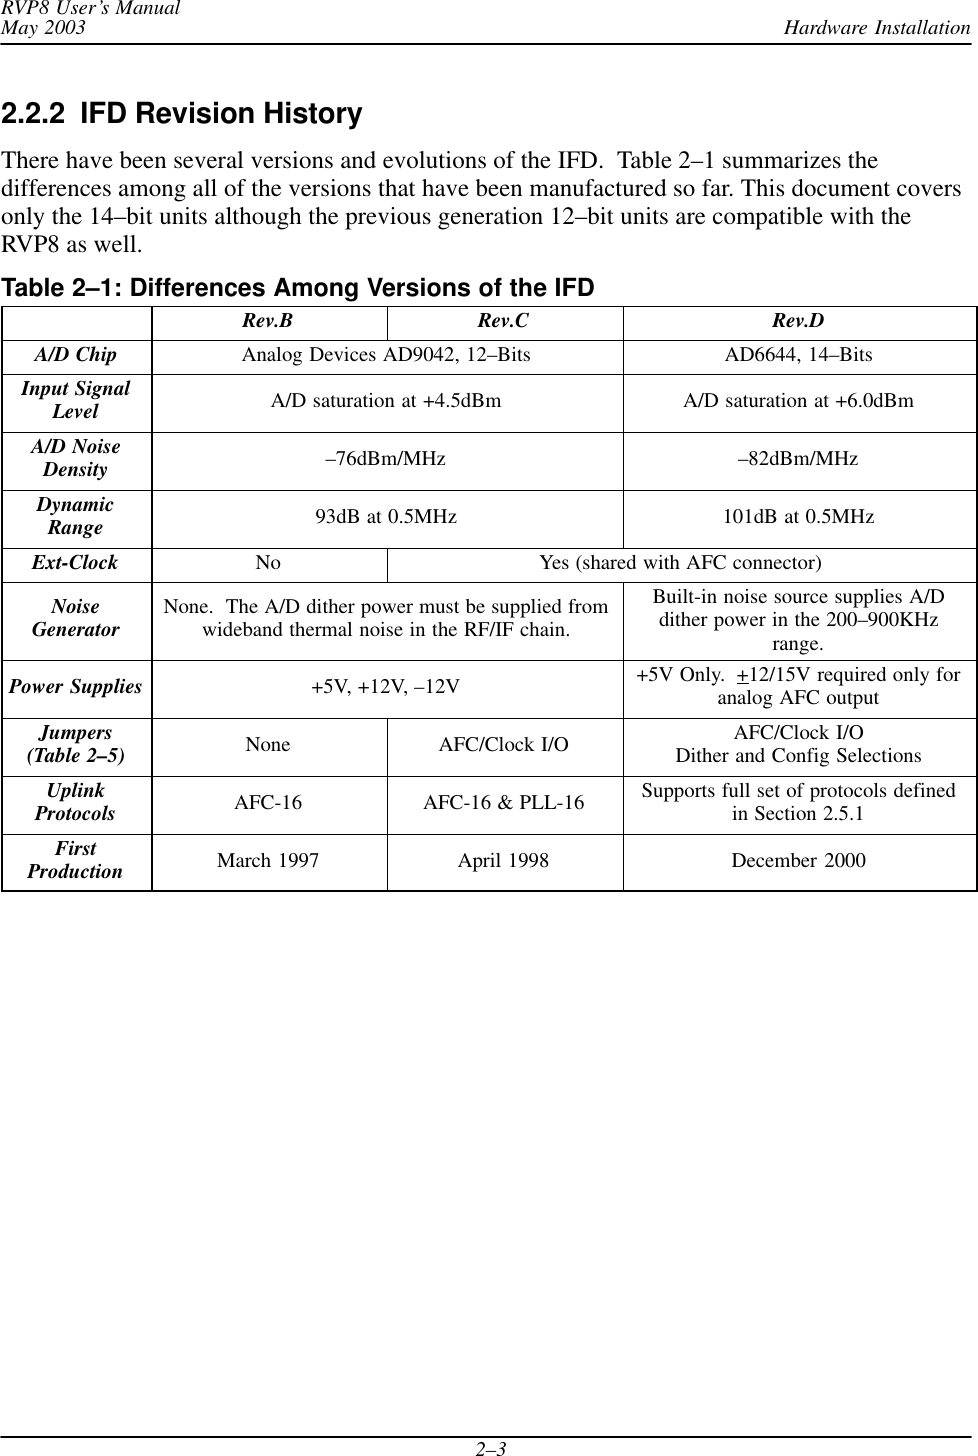 Hardware InstallationRVP8 User’s ManualMay 20032–32.2.2  IFD Revision HistoryThere have been several versions and evolutions of the IFD.  Table 2–1 summarizes thedifferences among all of the versions that have been manufactured so far. This document coversonly the 14–bit units although the previous generation 12–bit units are compatible with theRVP8 as well.Table 2–1: Differences Among Versions of the IFDRev.B Rev.C Rev.DA/D Chip Analog Devices AD9042, 12–Bits AD6644, 14–BitsInput SignalLevel A/D saturation at +4.5dBm A/D saturation at +6.0dBmA/D NoiseDensity –76dBm/MHz –82dBm/MHzDynamicRange 93dB at 0.5MHz 101dB at 0.5MHzExt-Clock No Yes (shared with AFC connector)NoiseGenerator None.  The A/D dither power must be supplied fromwideband thermal noise in the RF/IF chain.Built-in noise source supplies A/Ddither power in the 200–900KHzrange.Power Supplies +5V, +12V, –12V +5V Only.  +12/15V required only foranalog AFC outputJumpers(Table 2–5) None AFC/Clock I/O AFC/Clock I/ODither and Config SelectionsUplinkProtocols AFC-16 AFC-16 &amp; PLL-16 Supports full set of protocols definedin Section 2.5.1FirstProduction March 1997 April 1998 December 2000